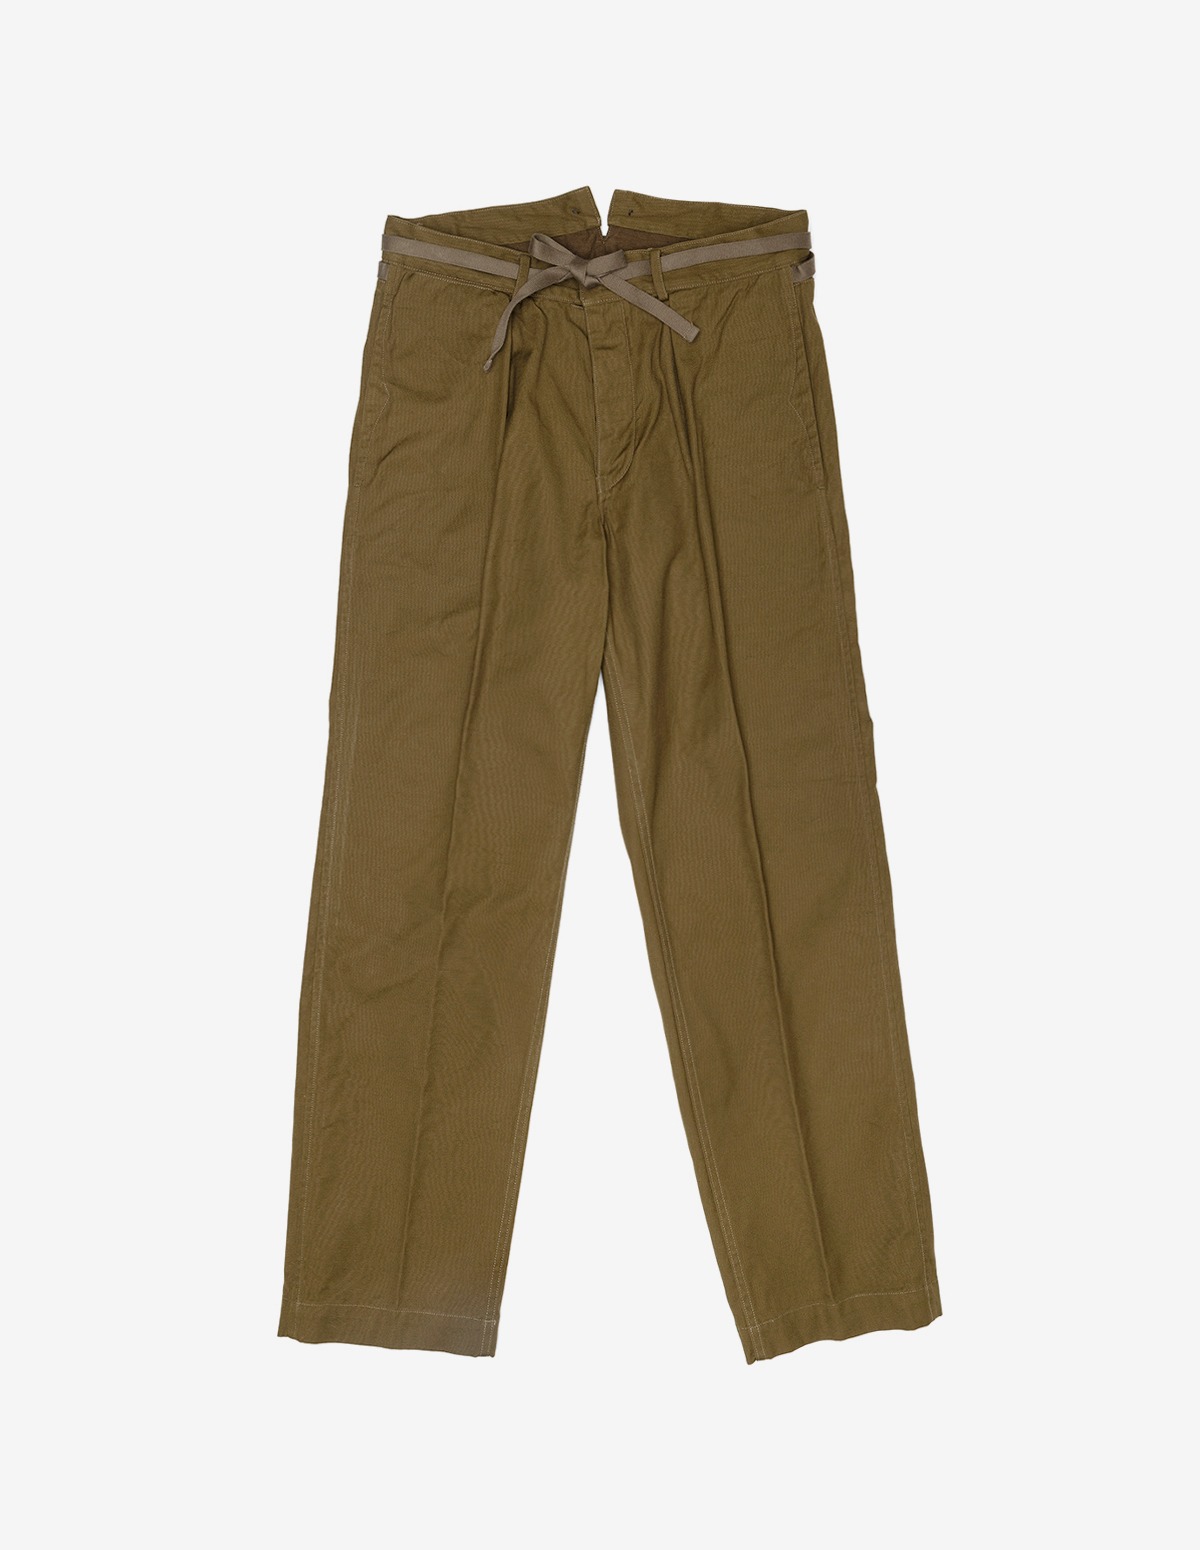 ALAIN Coherence Yacht Canvas Trousers